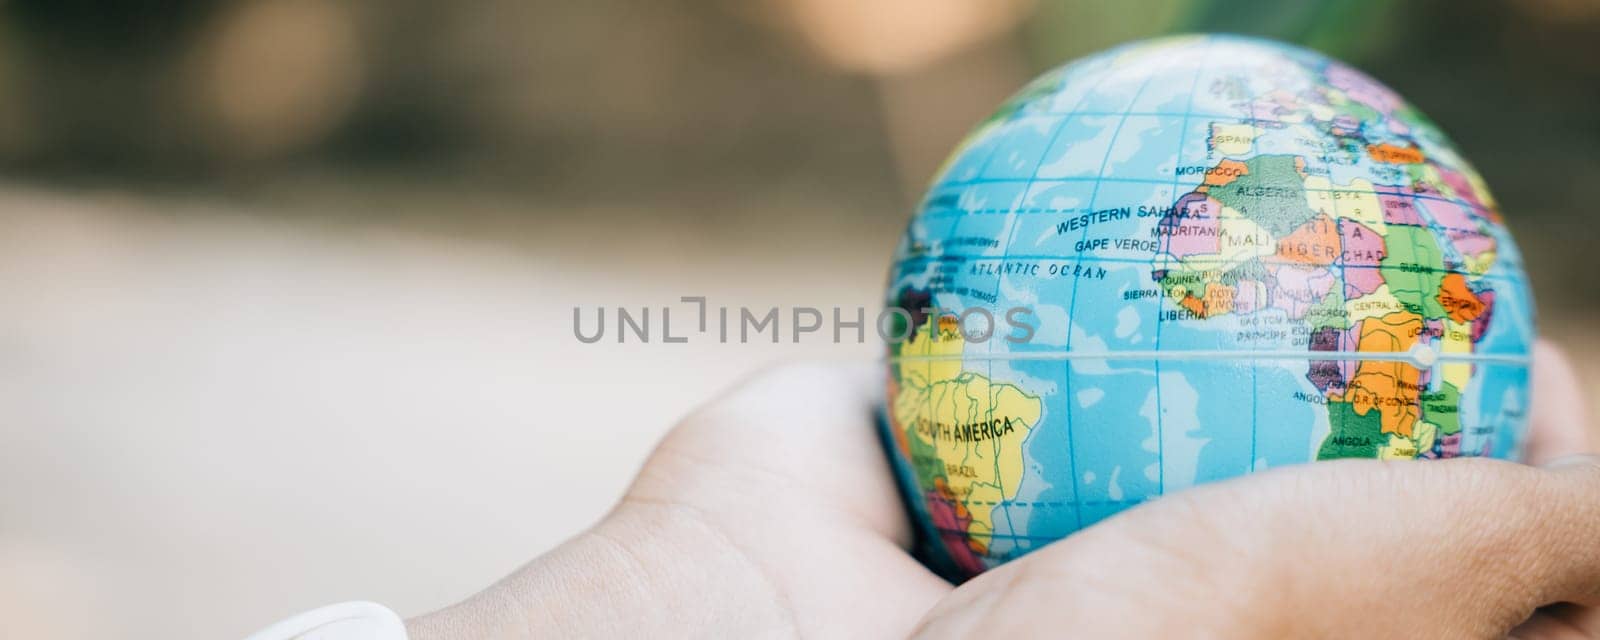 Embrace the Green Planet in your hands to signify Earth's preservation. This concept for Environment and Earth Day embodies responsibility, wisdom, and global support for our environment and nature.